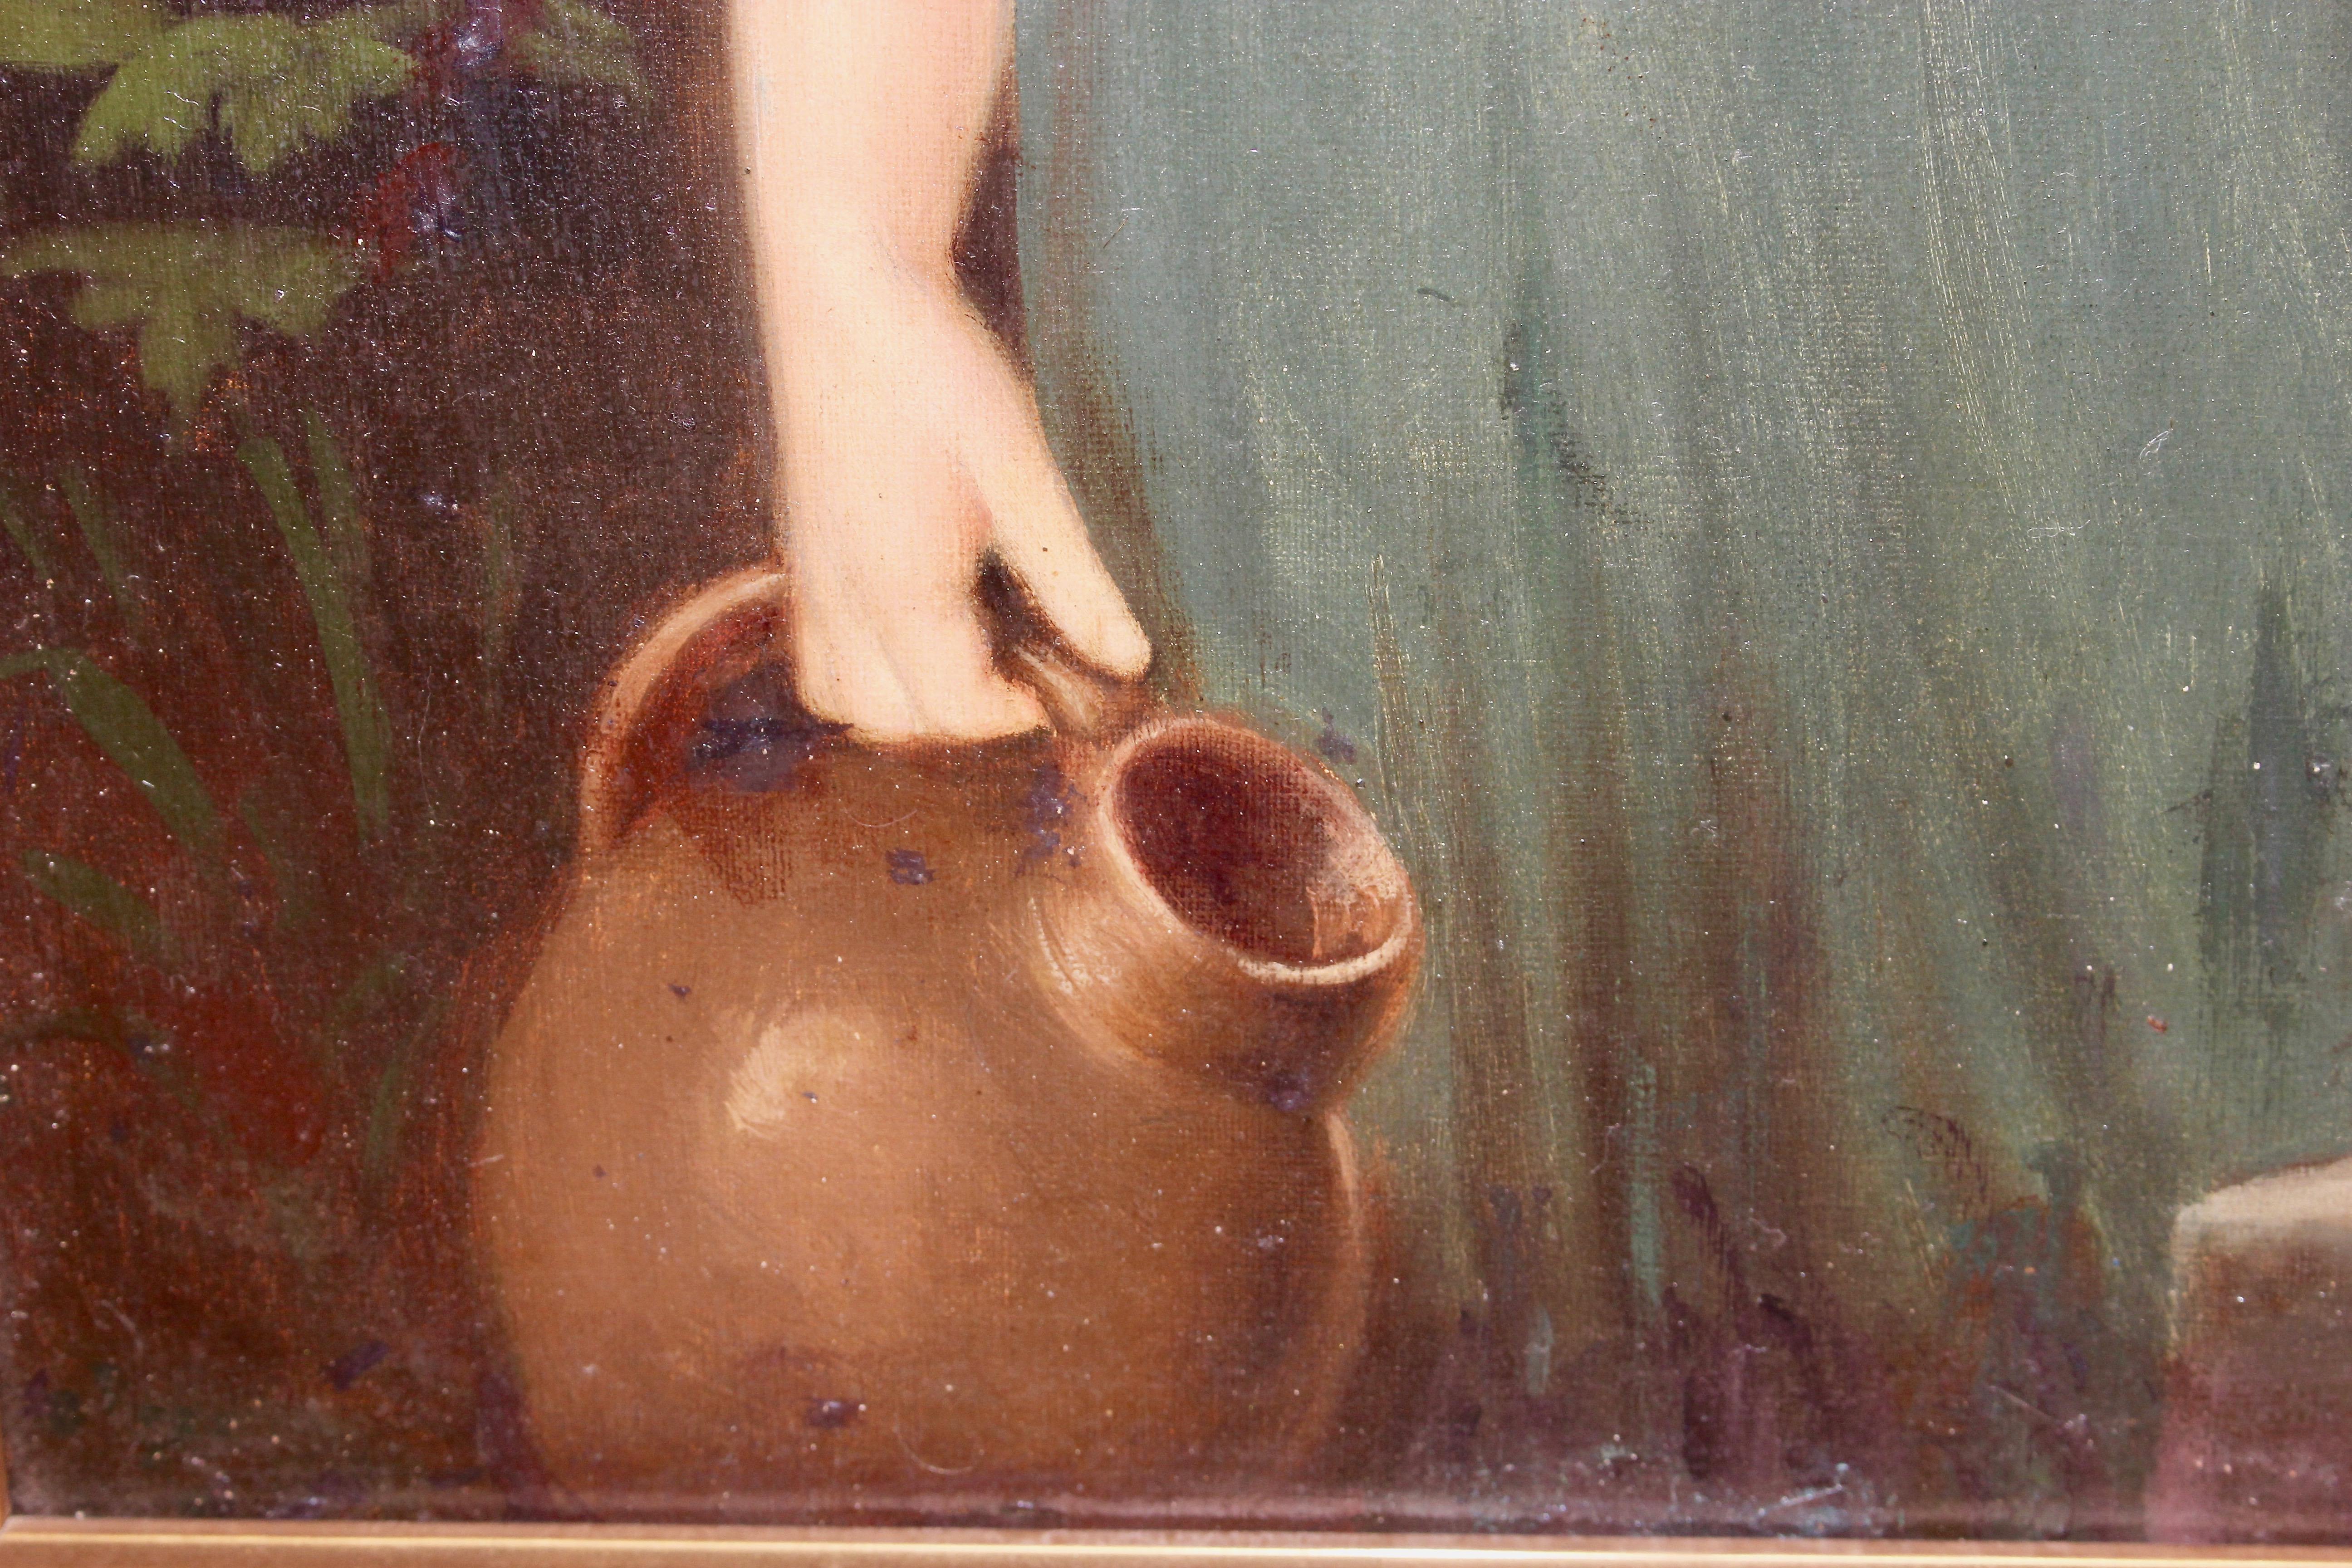 Painting, 19th century, oil on canvas, 